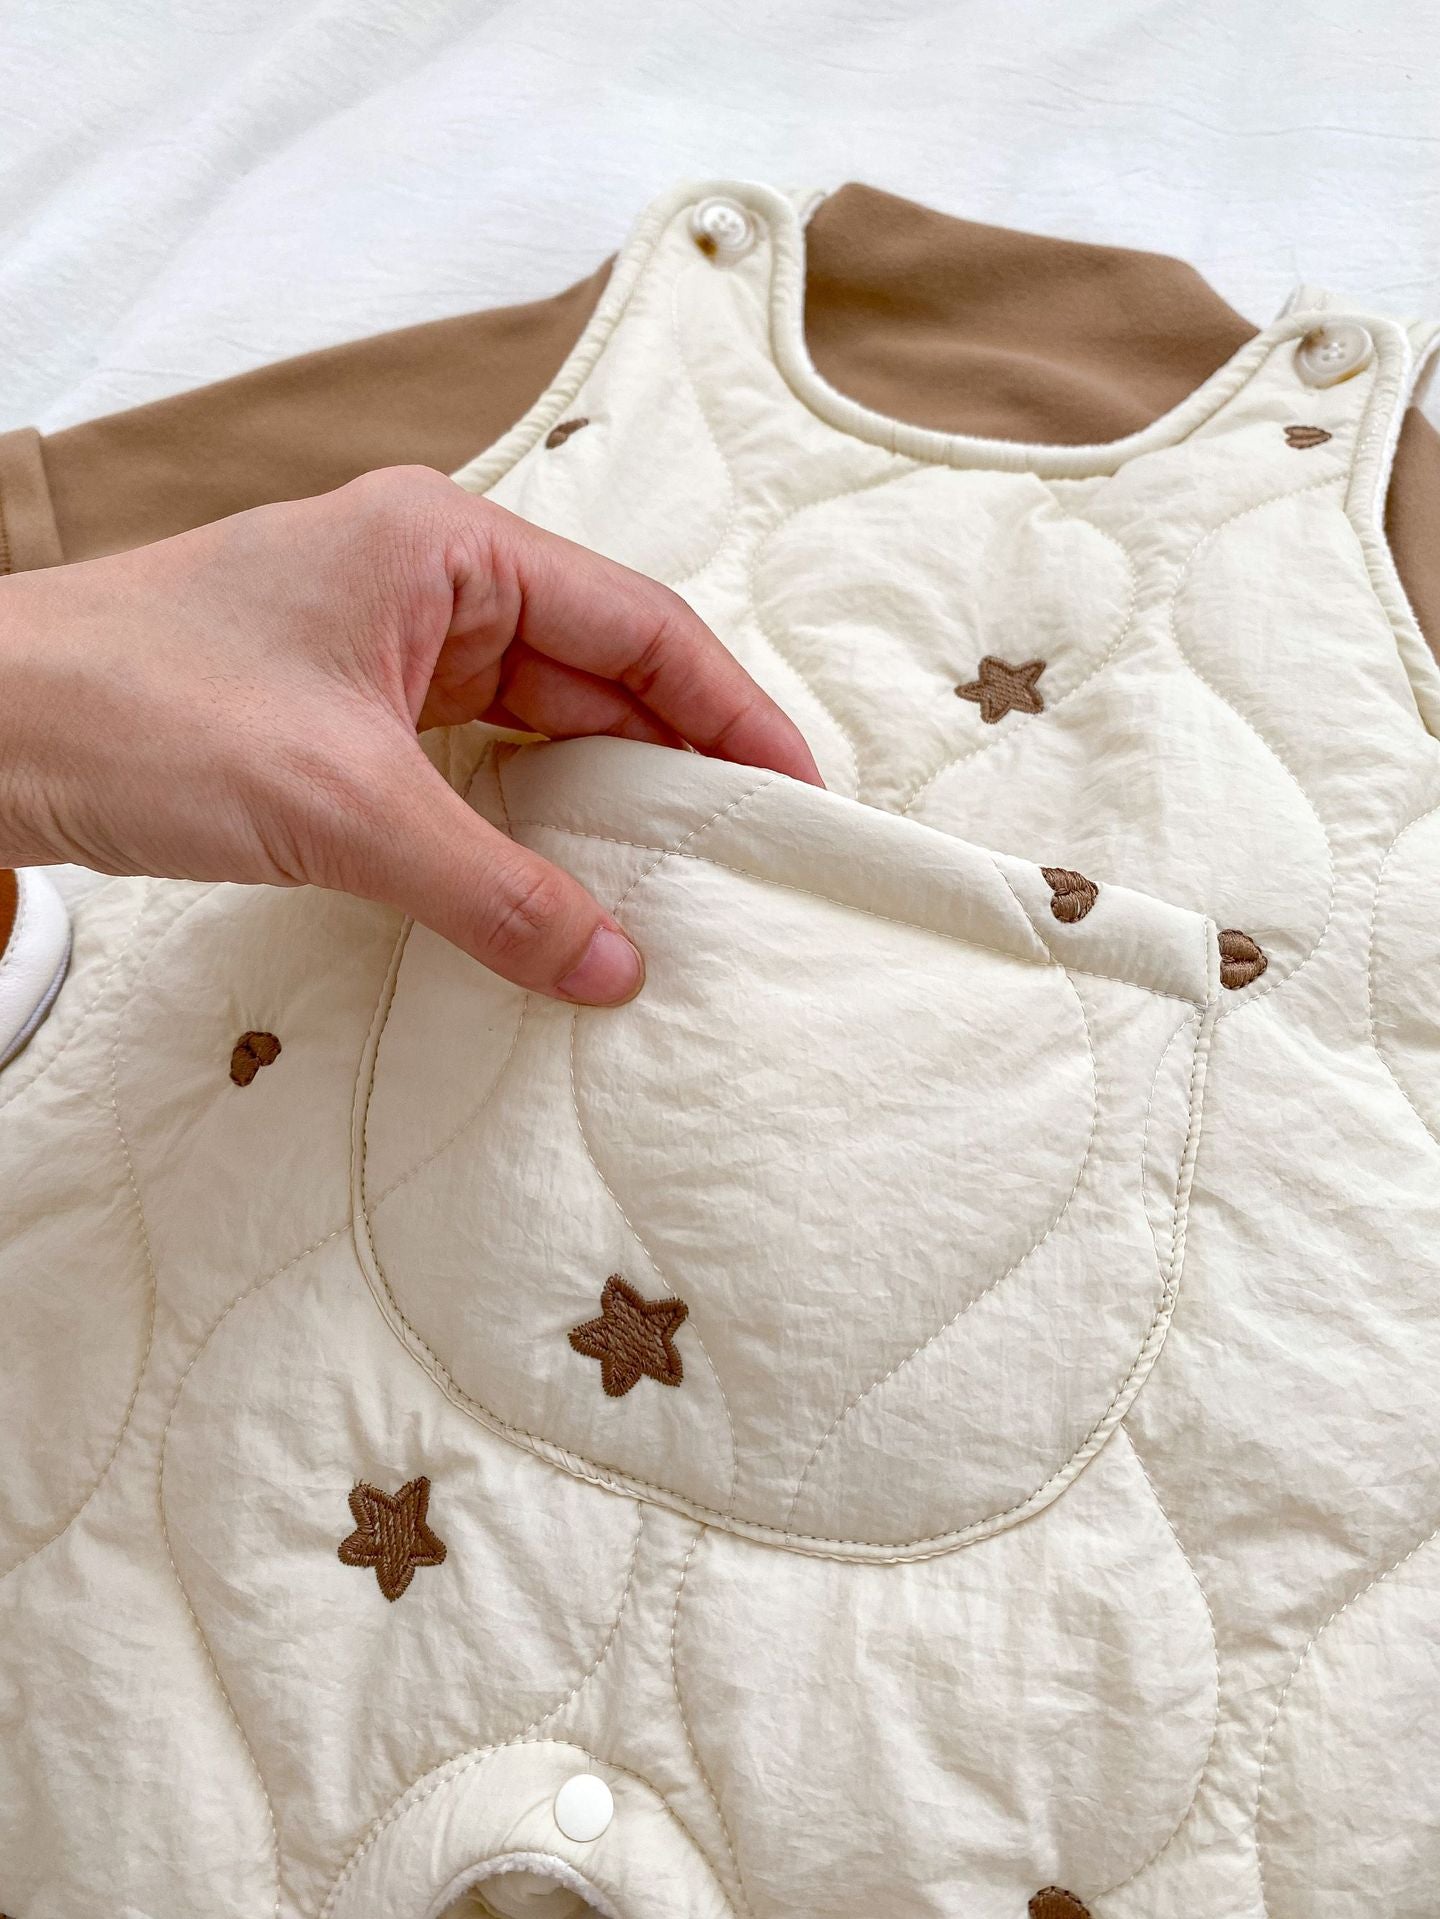 Infant Baby Star Embroidery Design Soft Cotton Fashion Overalls